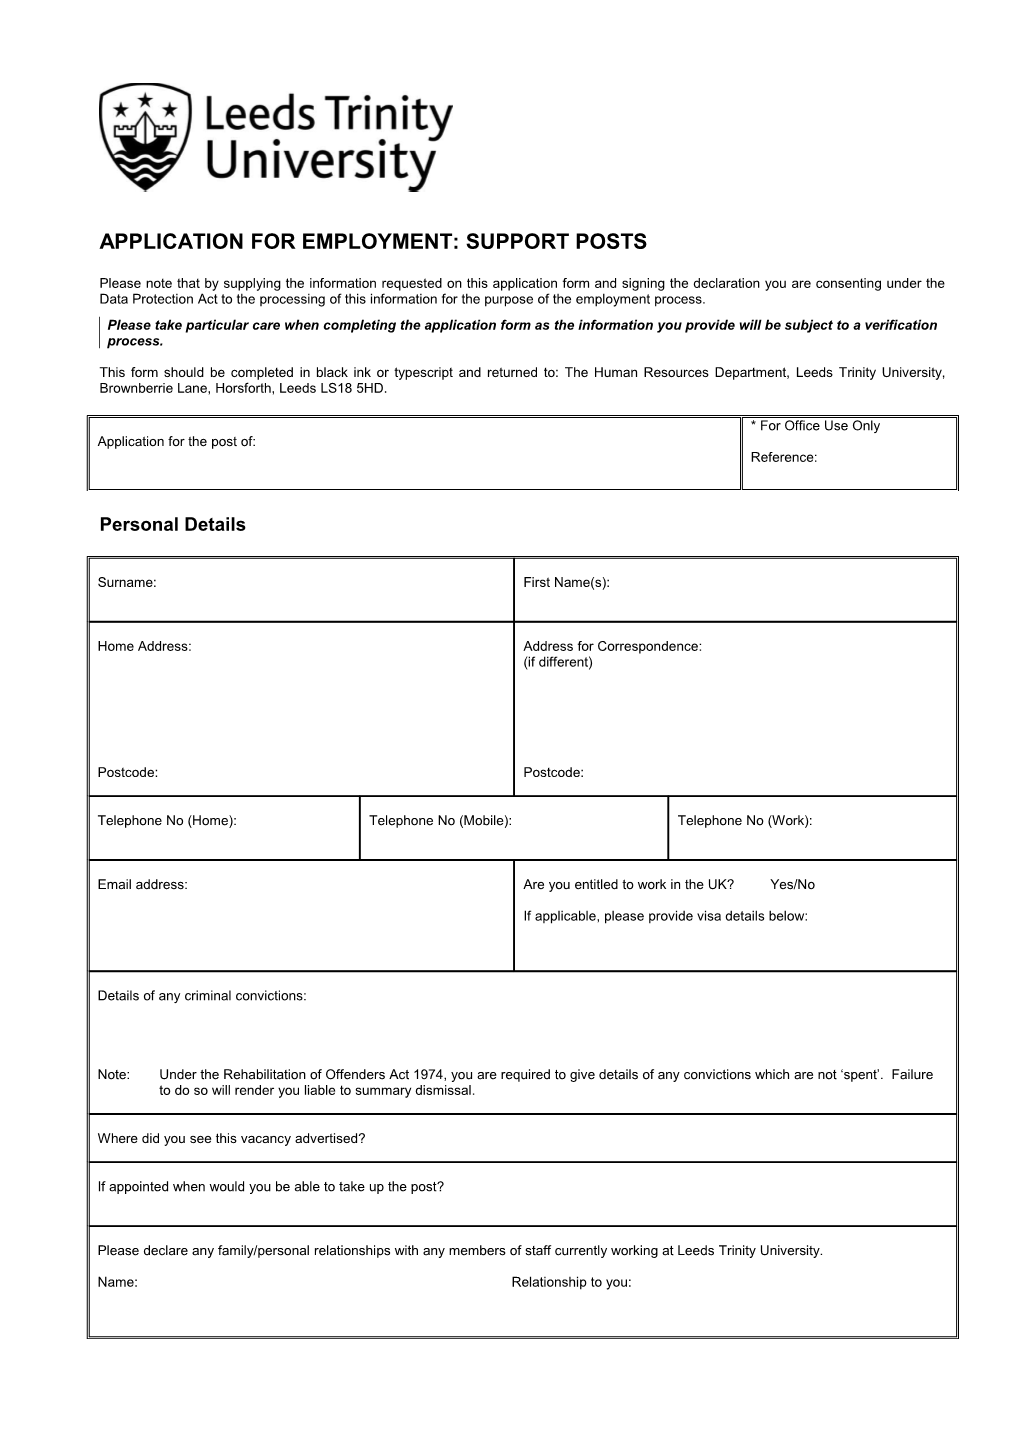 Application for Employment: Support Posts